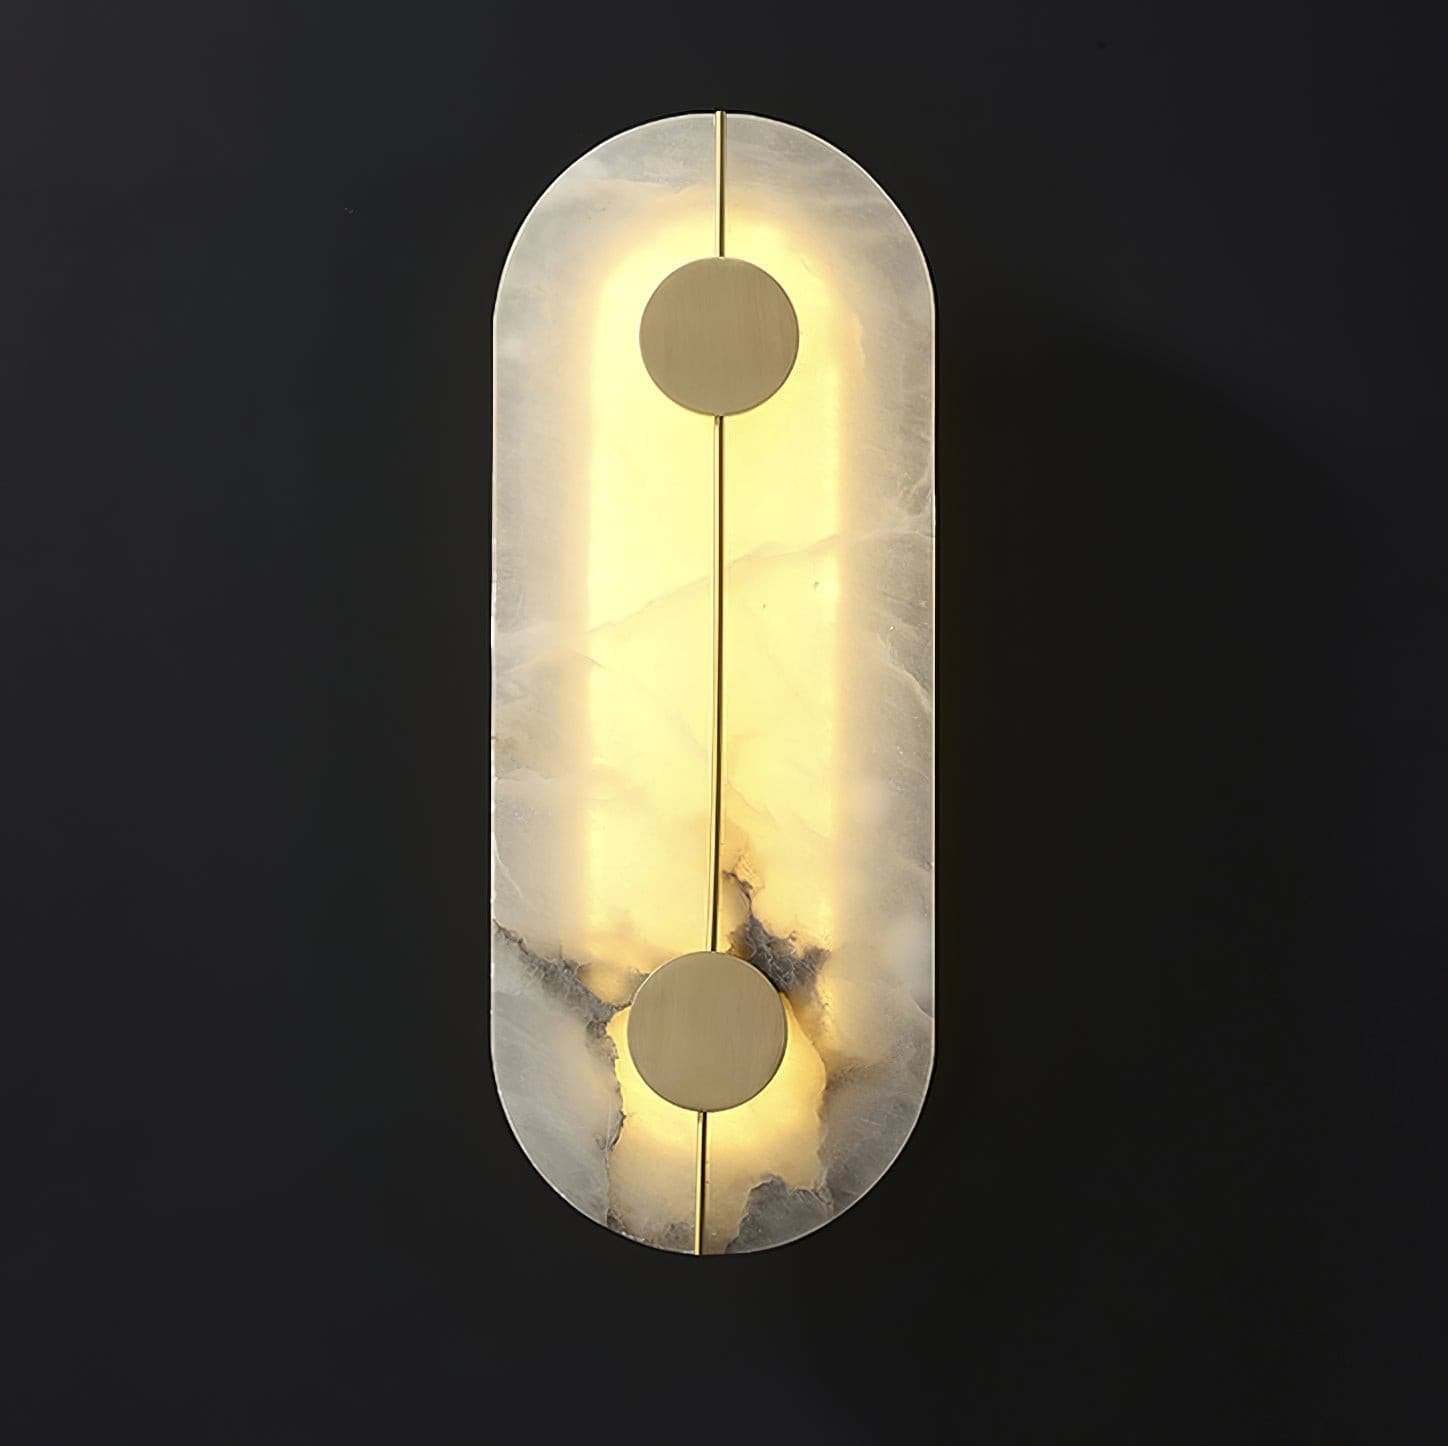 Set of 2 Artistic Marble Wall Lamps in White and Brass, Cool Light, 6.5" Diameter x 16.7" Height